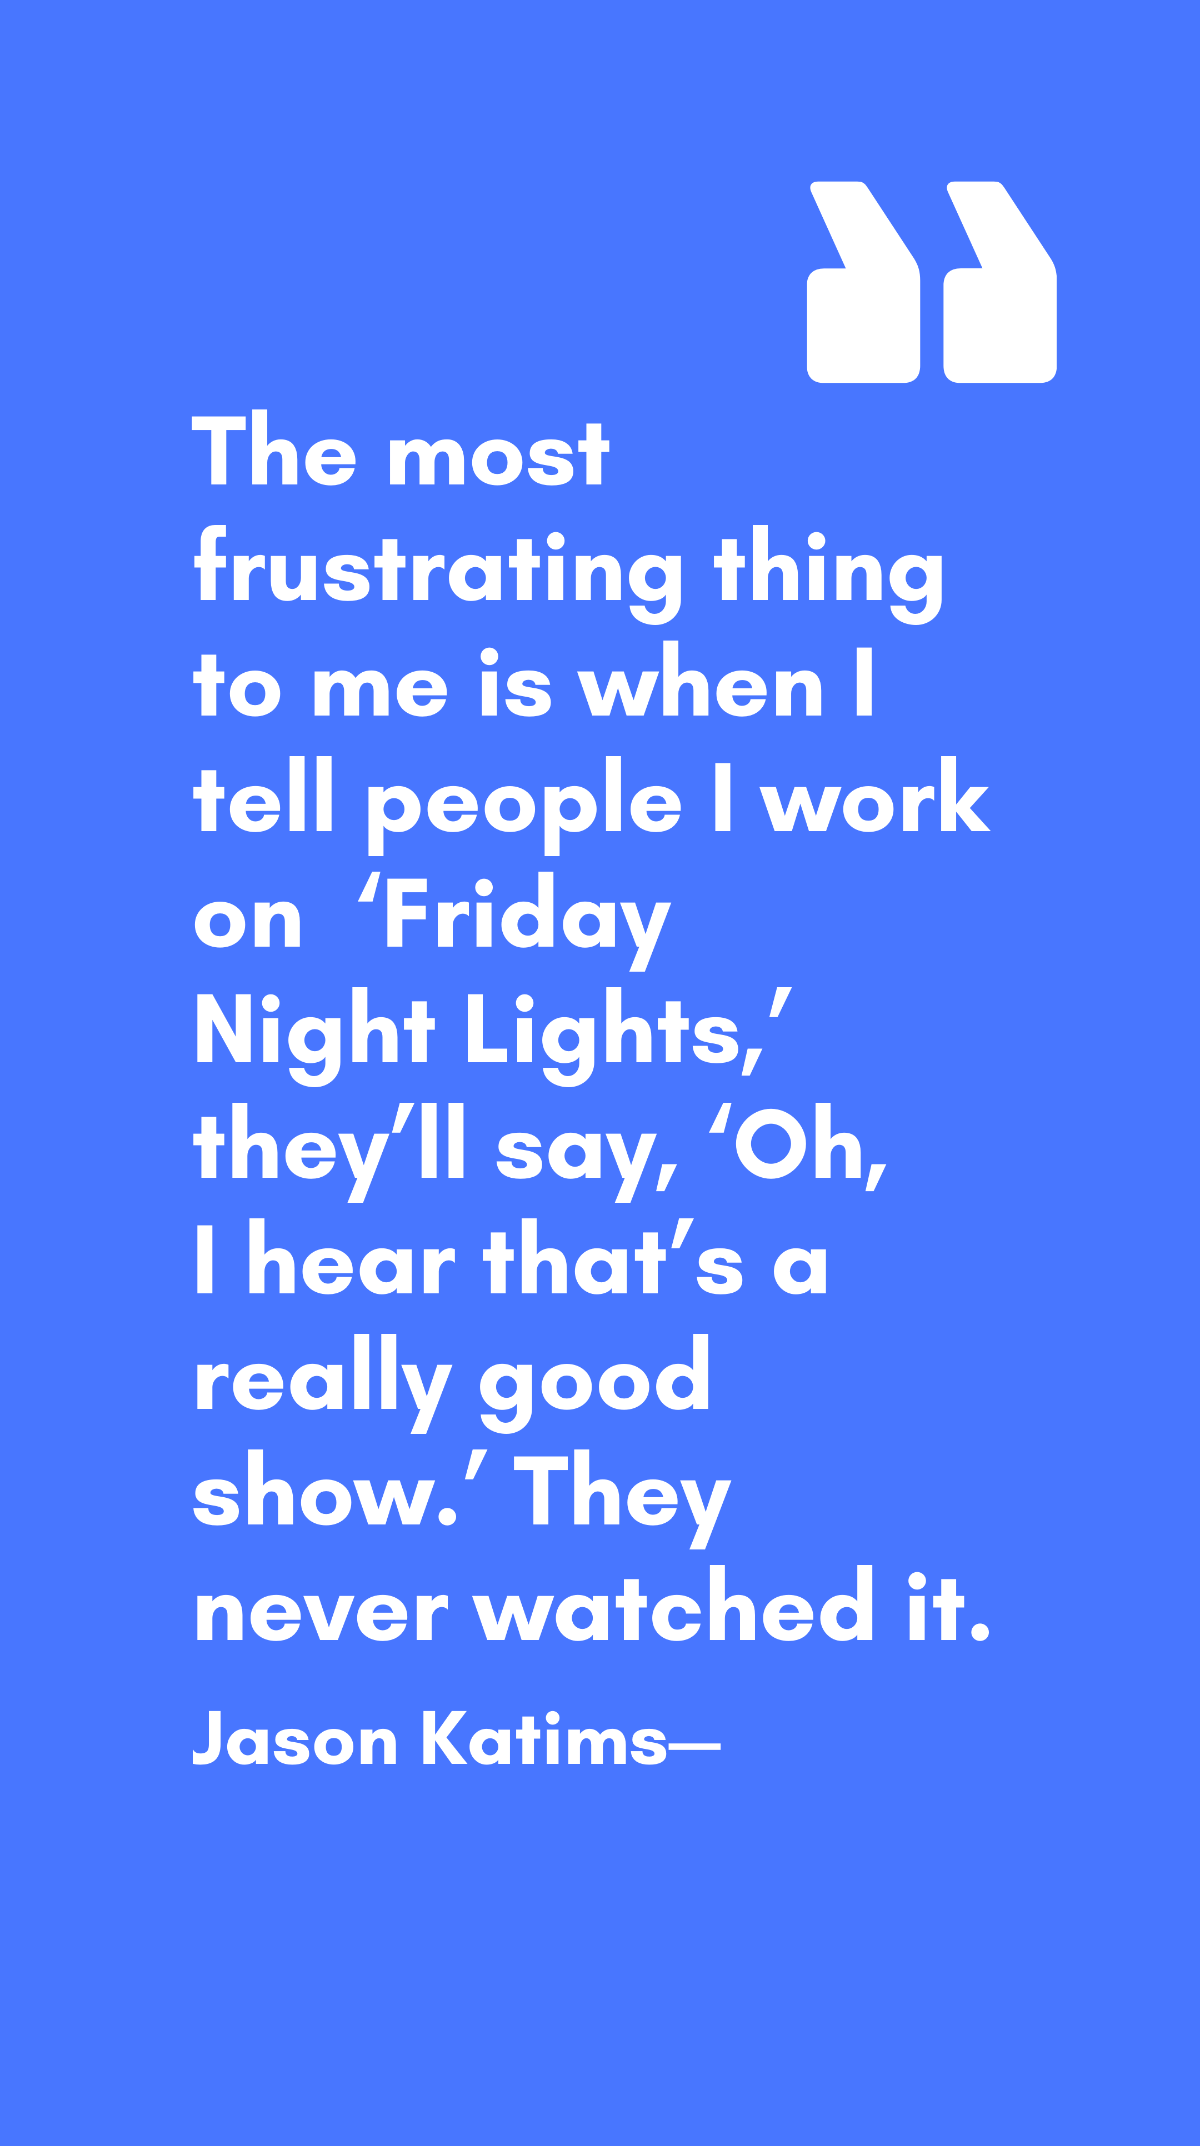 Free Jason Katims - The most frustrating thing to me is when I tell people I work on ‘Friday Night Lights,’ they’ll say, ‘Oh, I hear that’s a really good show.’ They never watched it.  Template